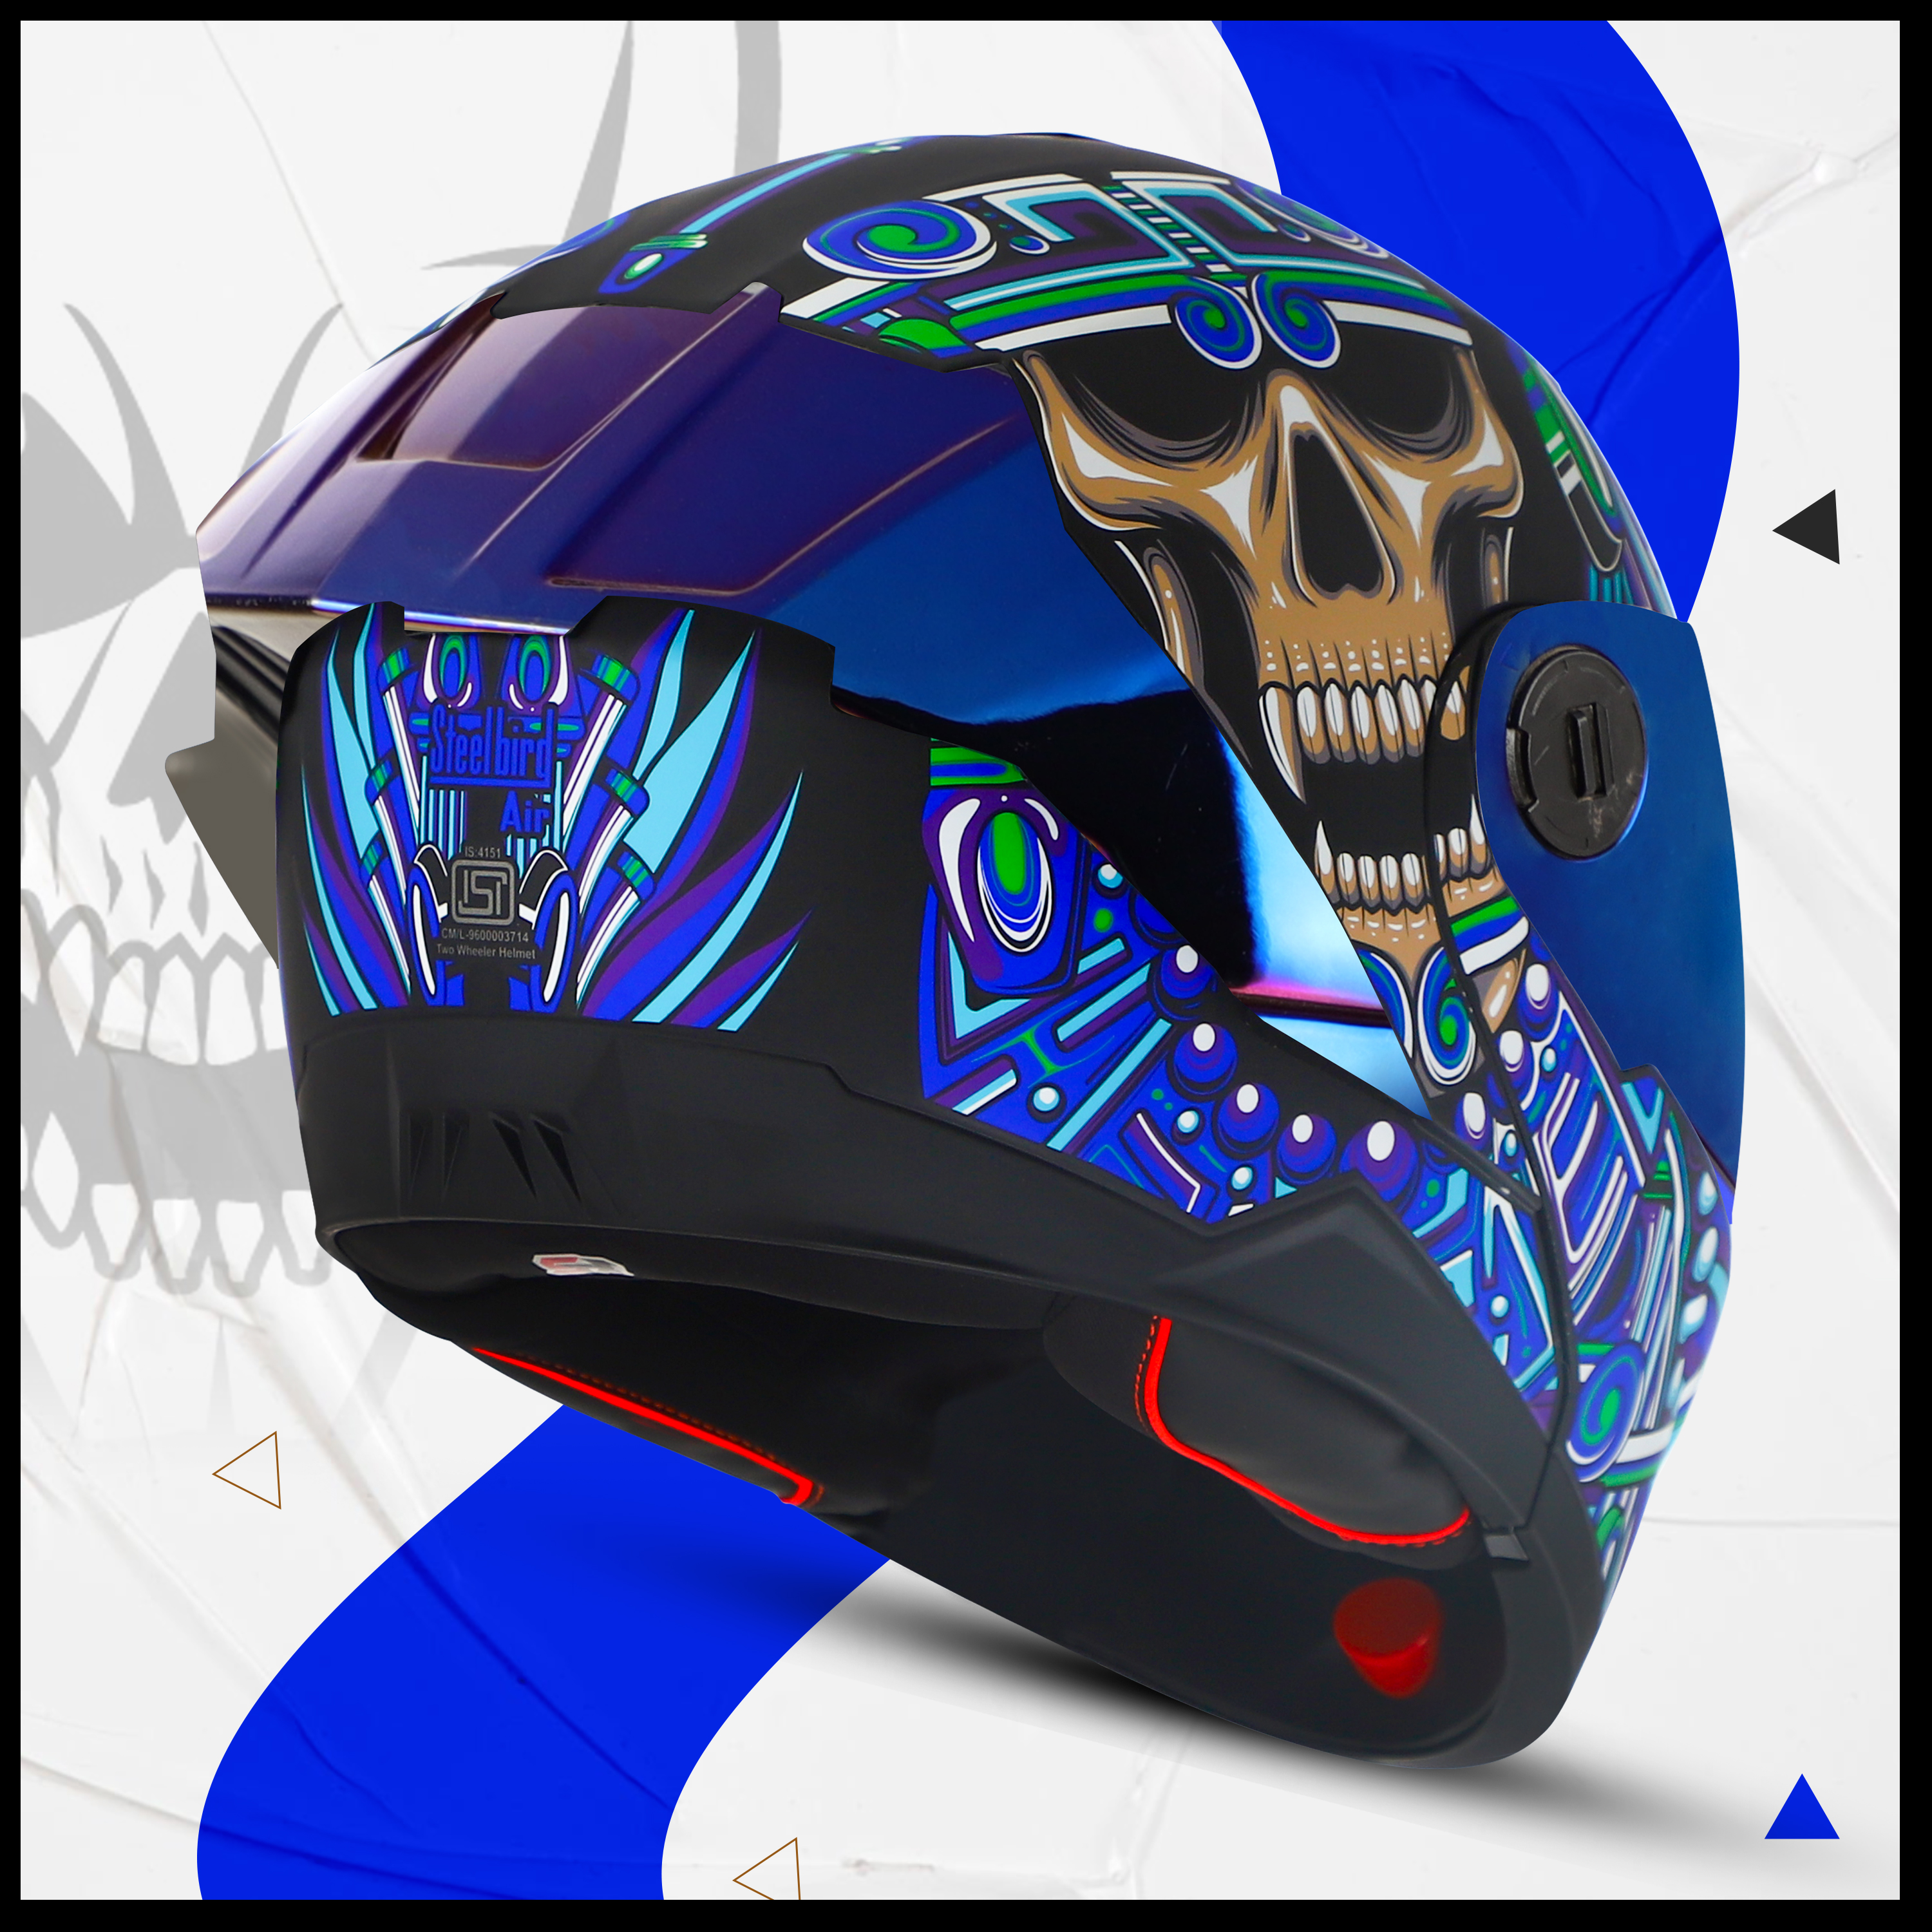 Steelbird SBA-8 Hunt ISI Certified Flip-Up Graphic Helmet For Men And Women With Inner Smoke Sun Shield (Glossy Black Blue With Blue Spoiler And Chrome Blue Visor)